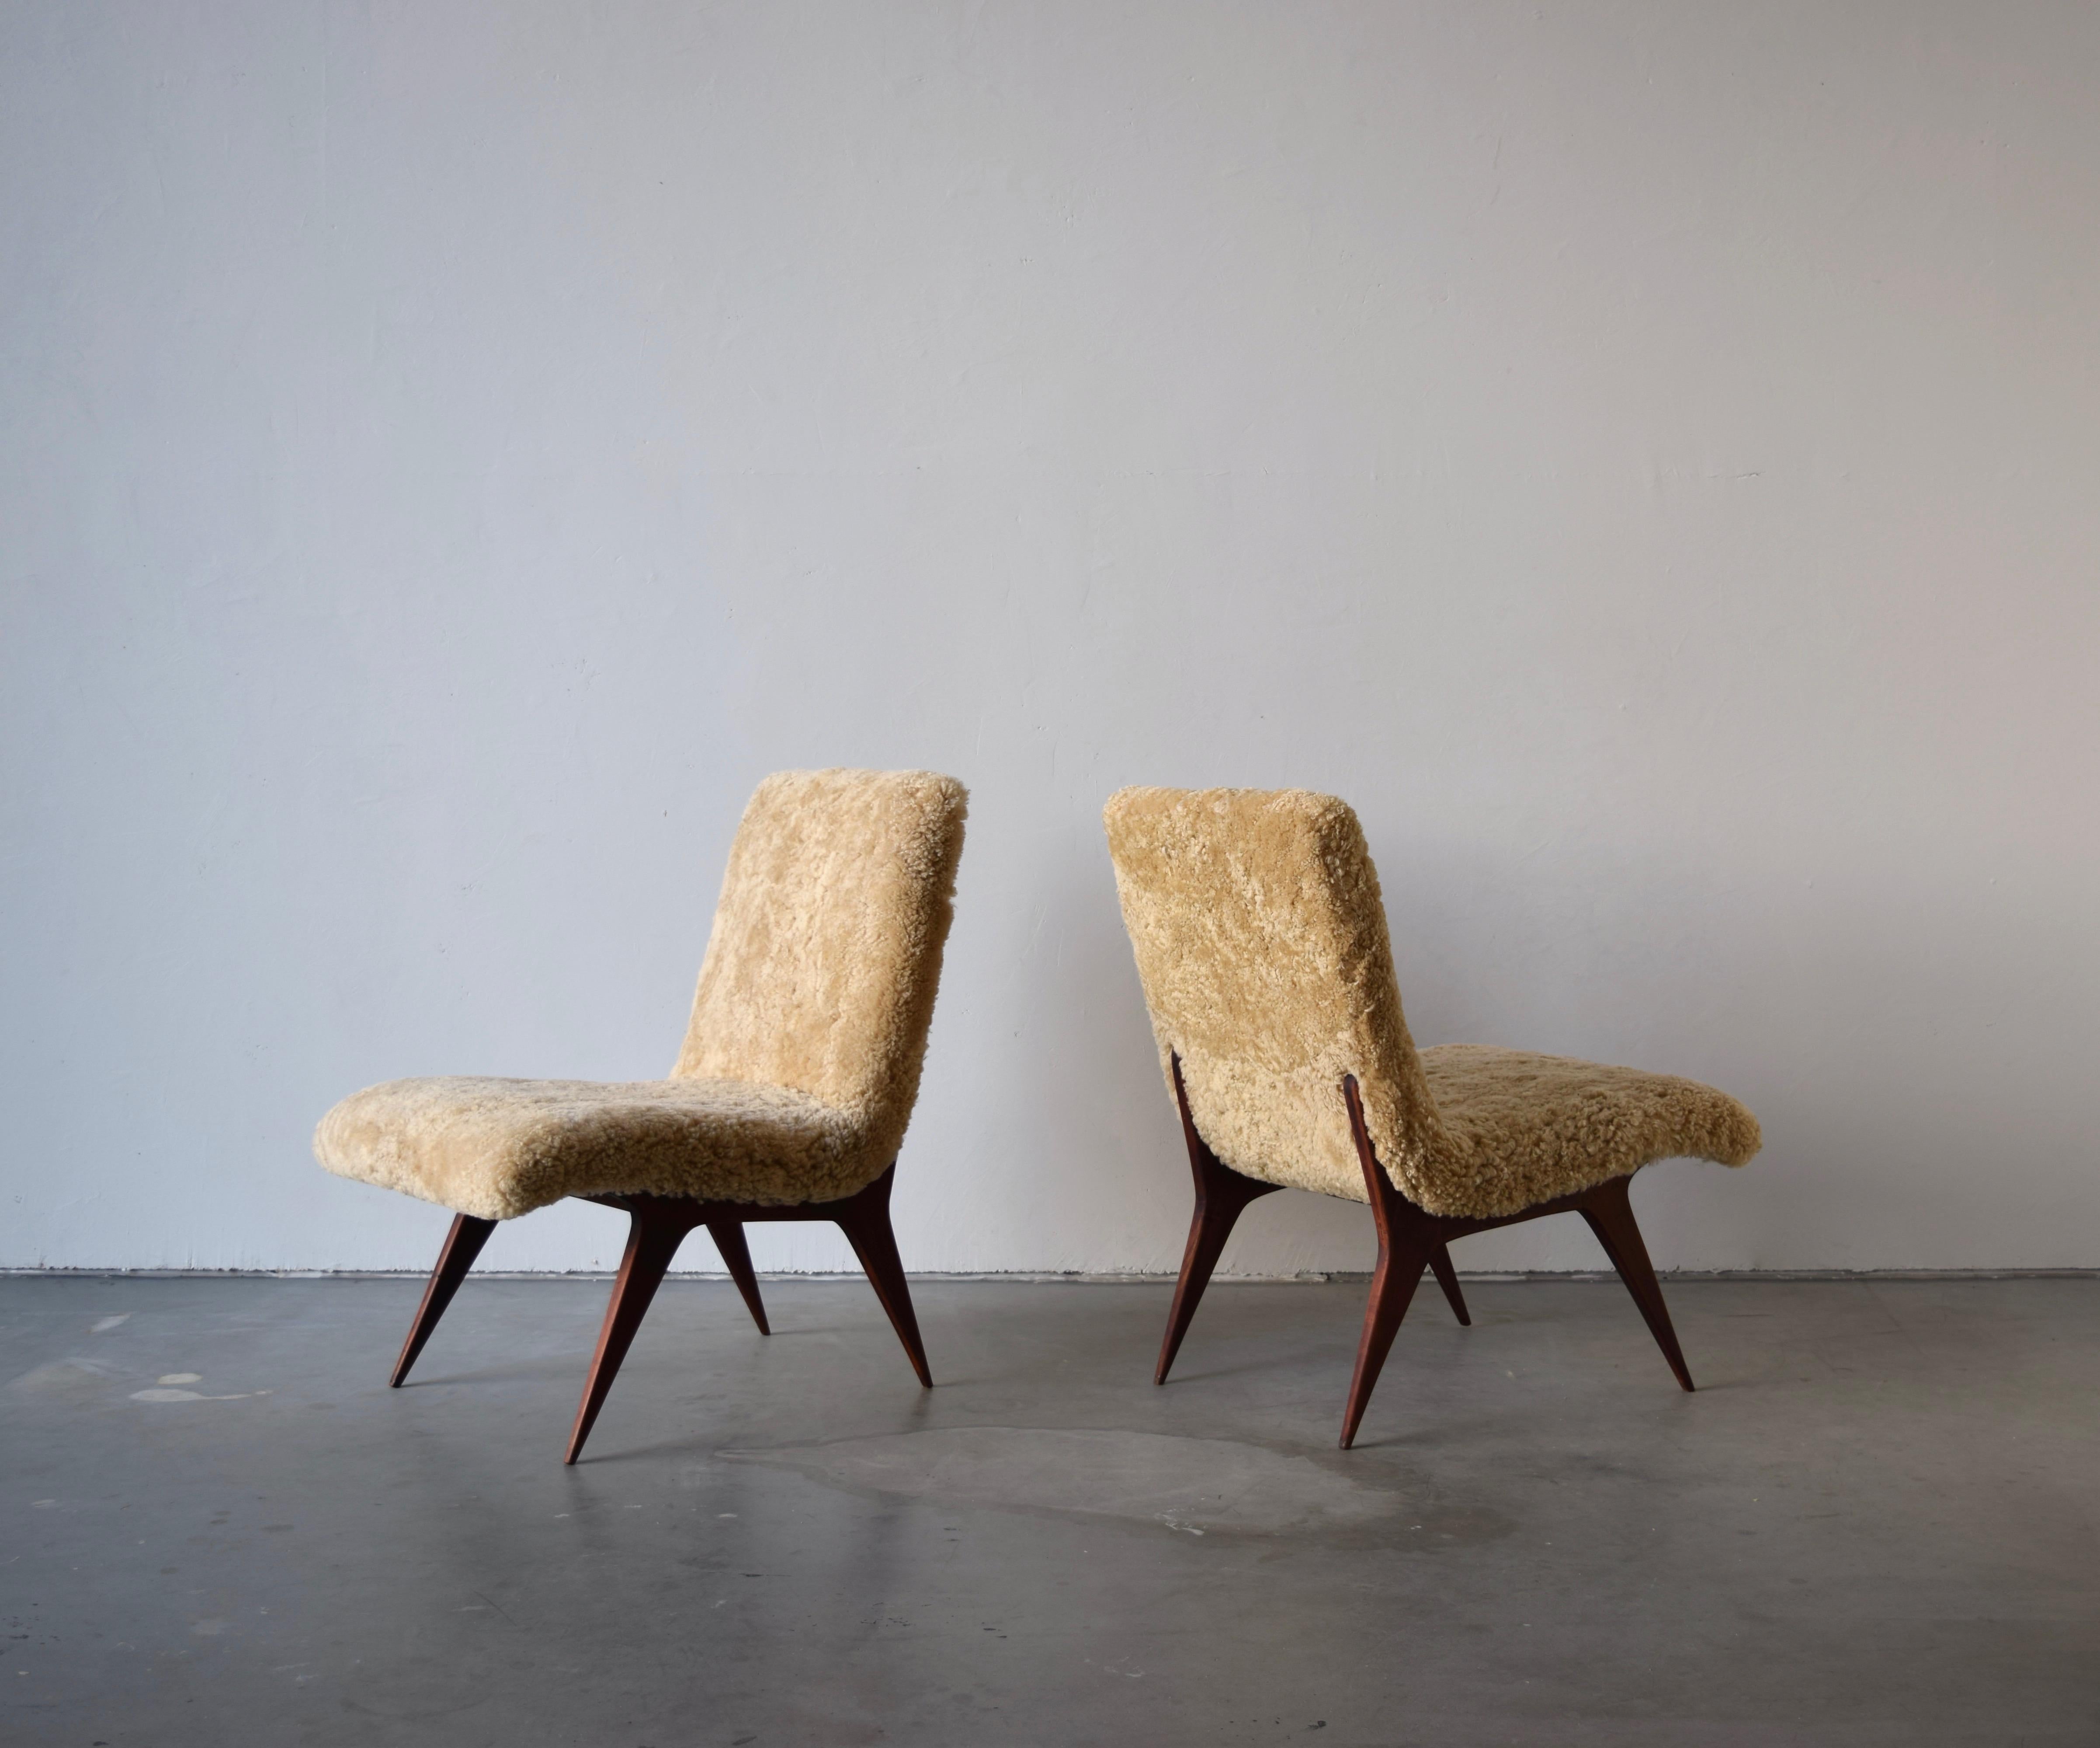 A pair of modernist lounge chairs / slipper chairs. Designed by an unknown Italian designer, produced 1950s, Italy. Frame in cherrywood, upholstered in brand new authentic sheepskin.

Other designers working in the organic style include: Paolo